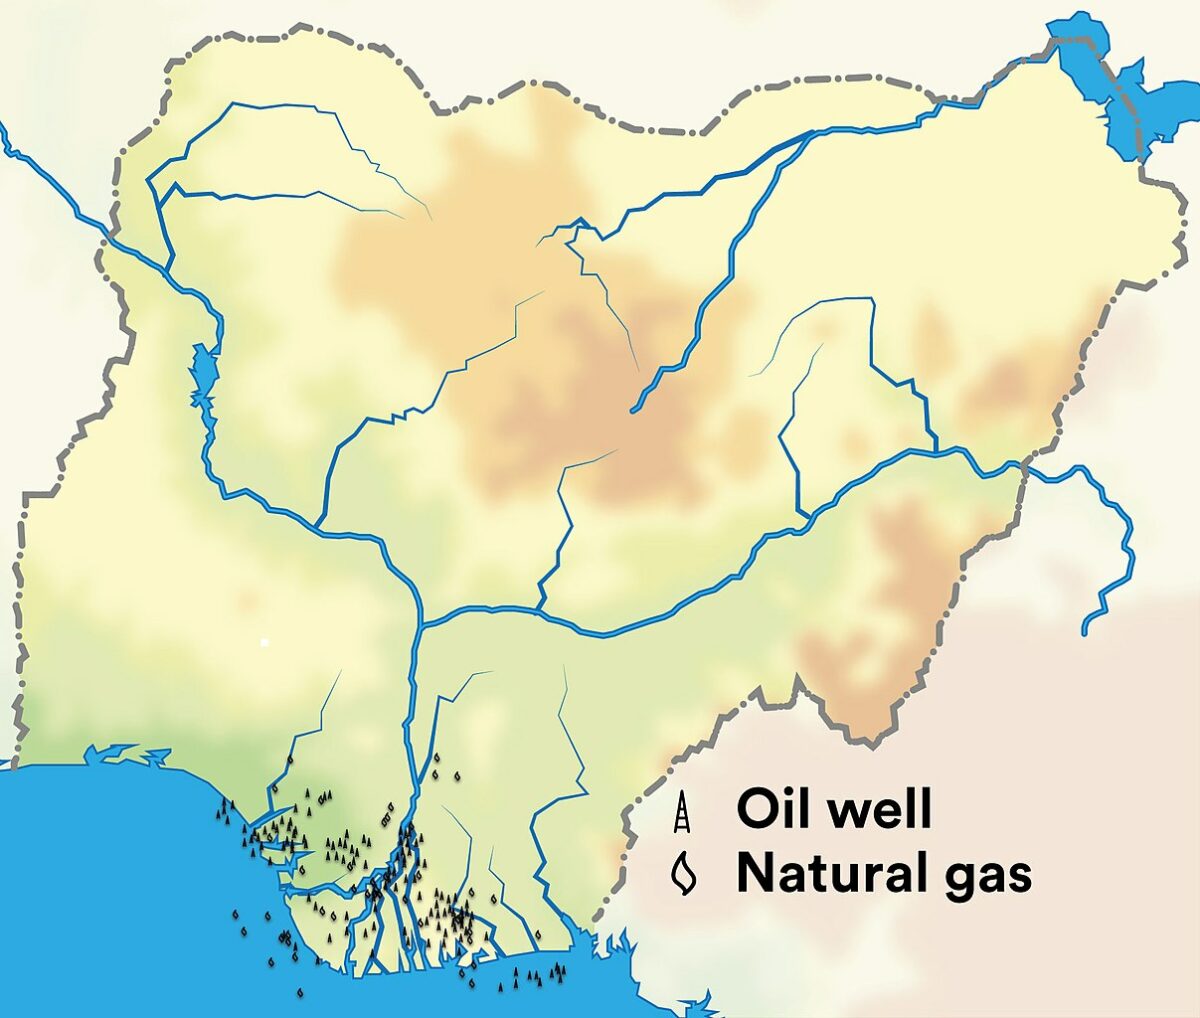 Oil wells and natural gas fields in Nigeria. By FrankvEck; https://creativecommons.org/licenses/by-sa/4.0/deed.en